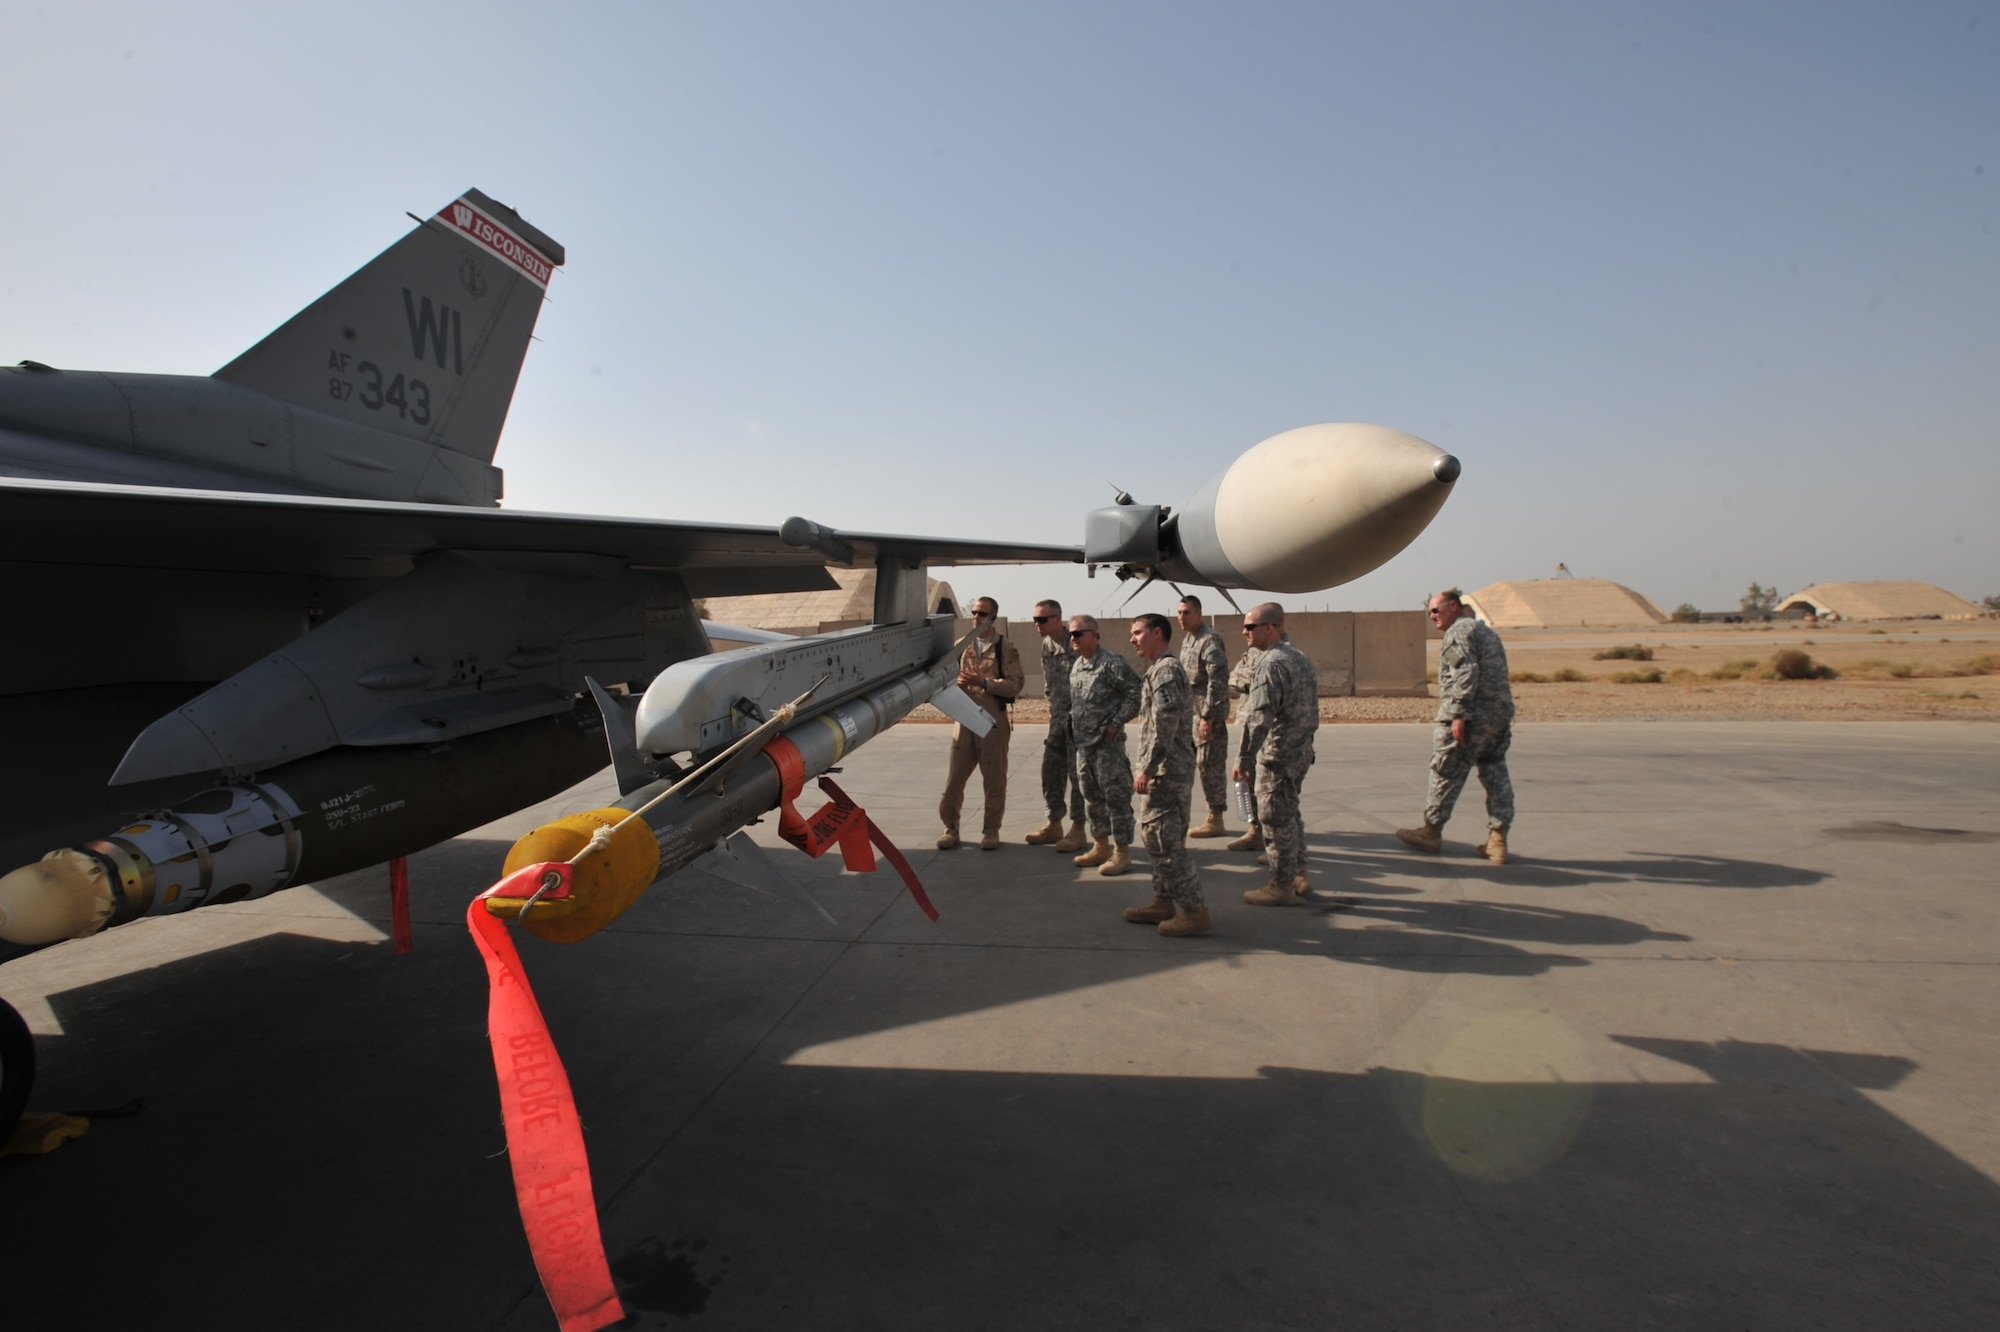 Wisconsin Army National Guard Soldiers of the 32nd Infantry Brigade Combat Team look over one of the Wisconsin Air National Guard's F-16 fighters at an air base in Iraq. (U.S. Army photo by Spc. Tyler Lasure)